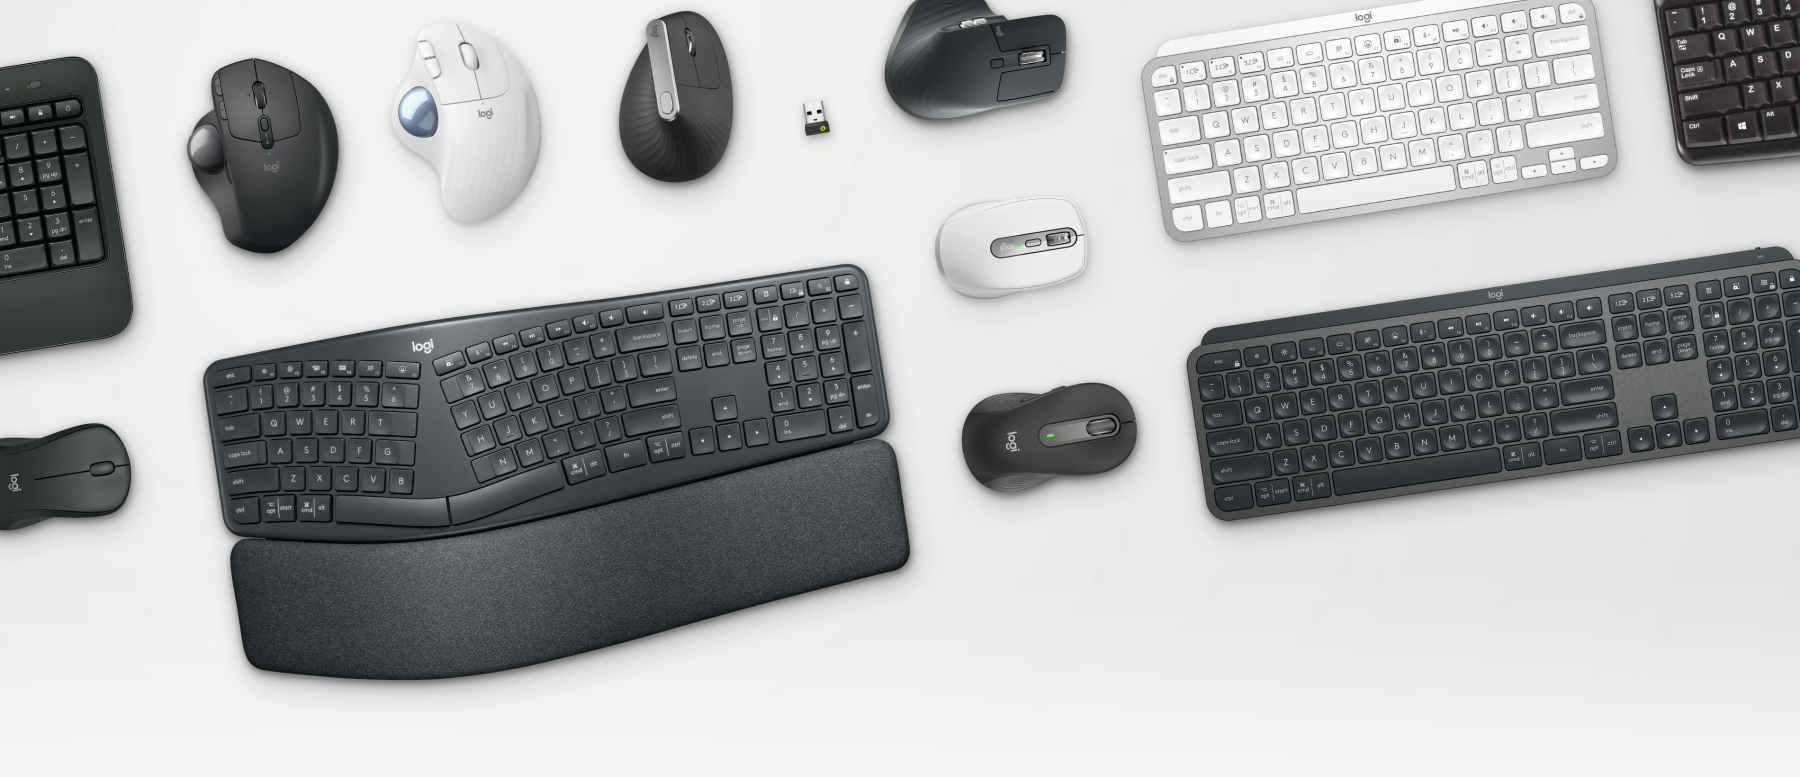 Business Tools - MX Mice and Keyboards on table